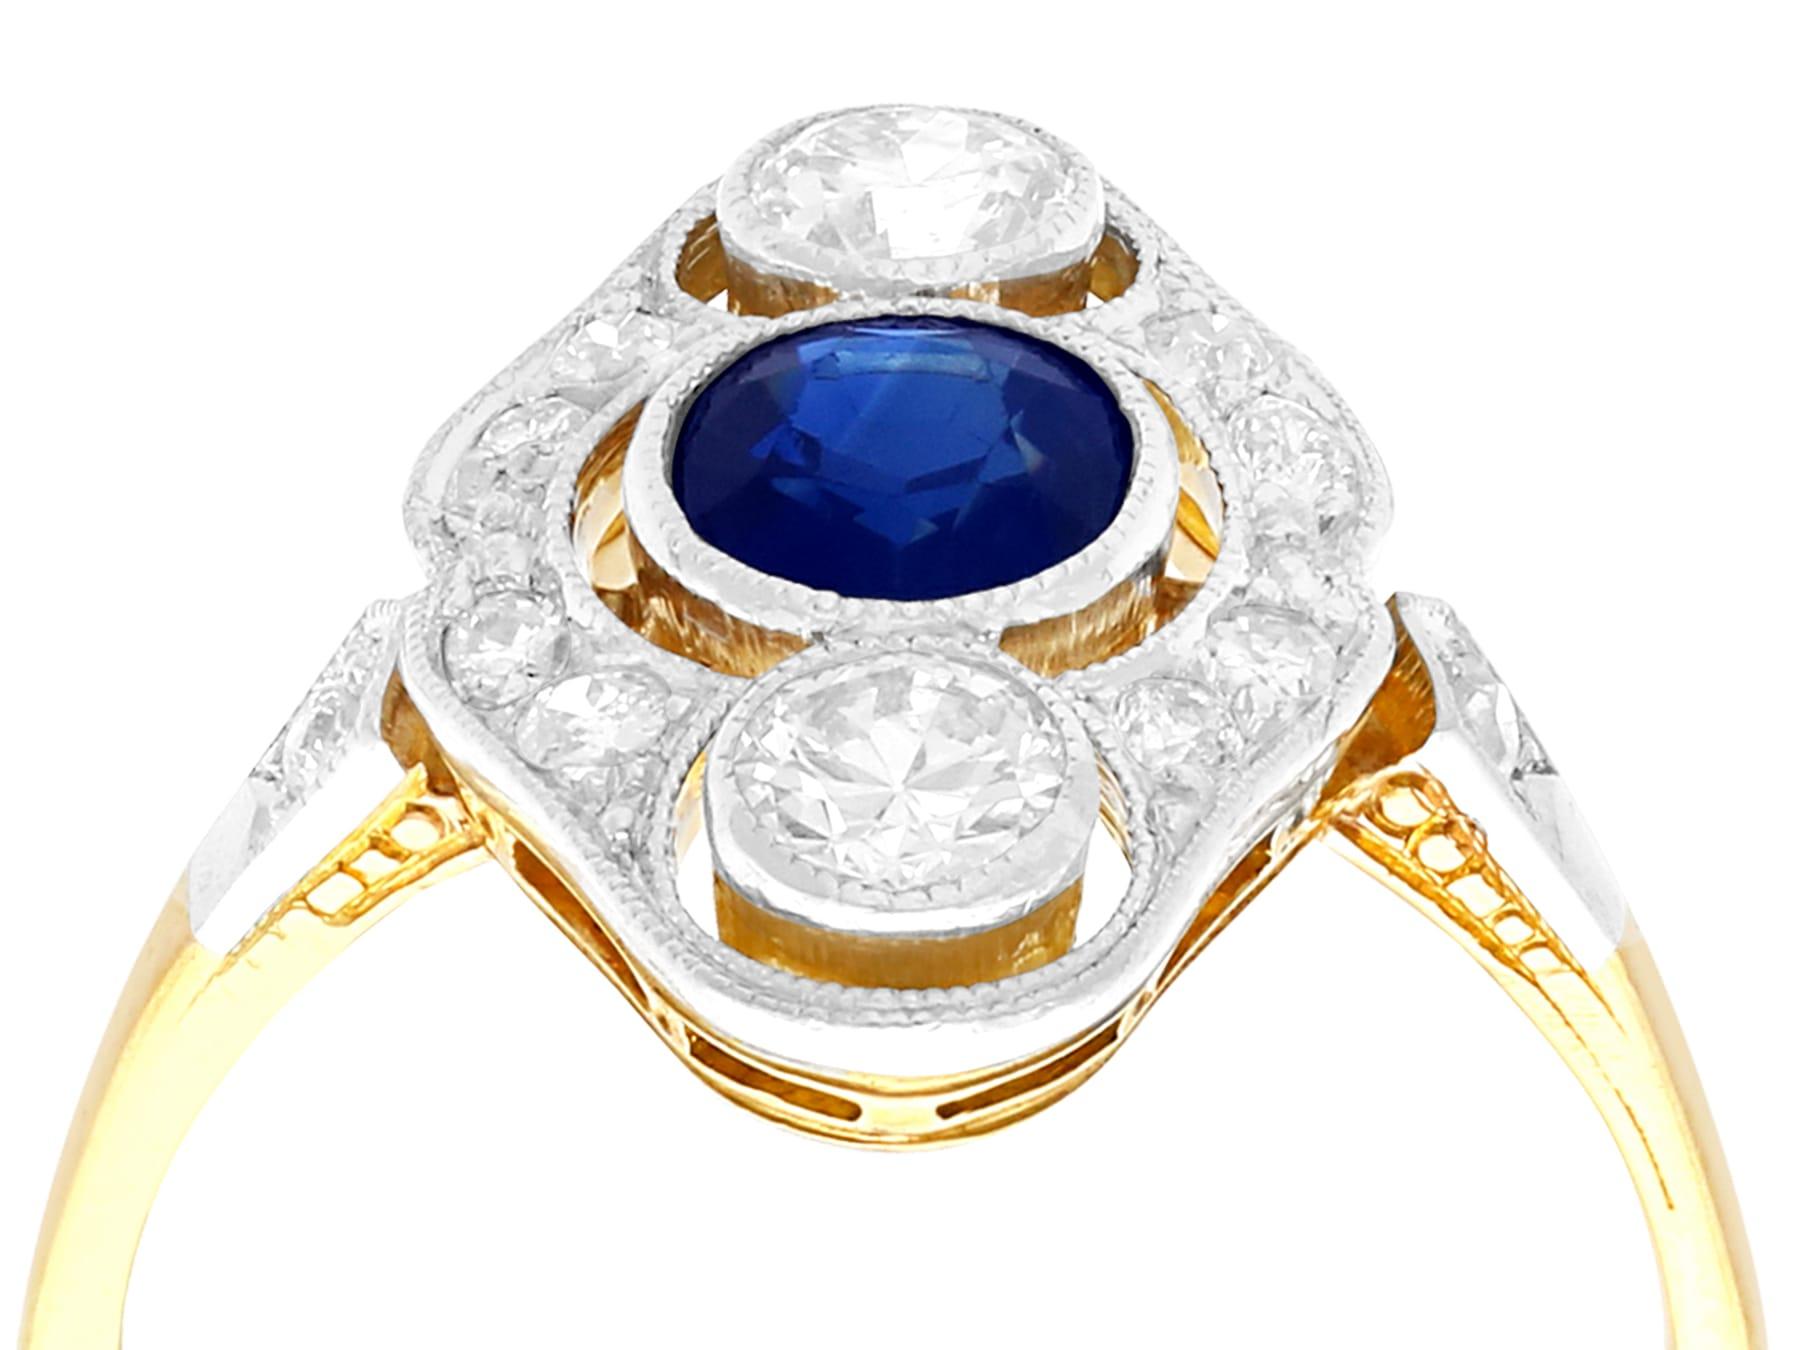 A fine and impressive vintage Art Deco 0.38 carat blue sapphire and 0.50 carat diamond, 14 karat yellow gold and 14 karat white gold set cocktail ring; part of our diverse gemstone jewelry and estate jewelry collections.

This fine and impressive